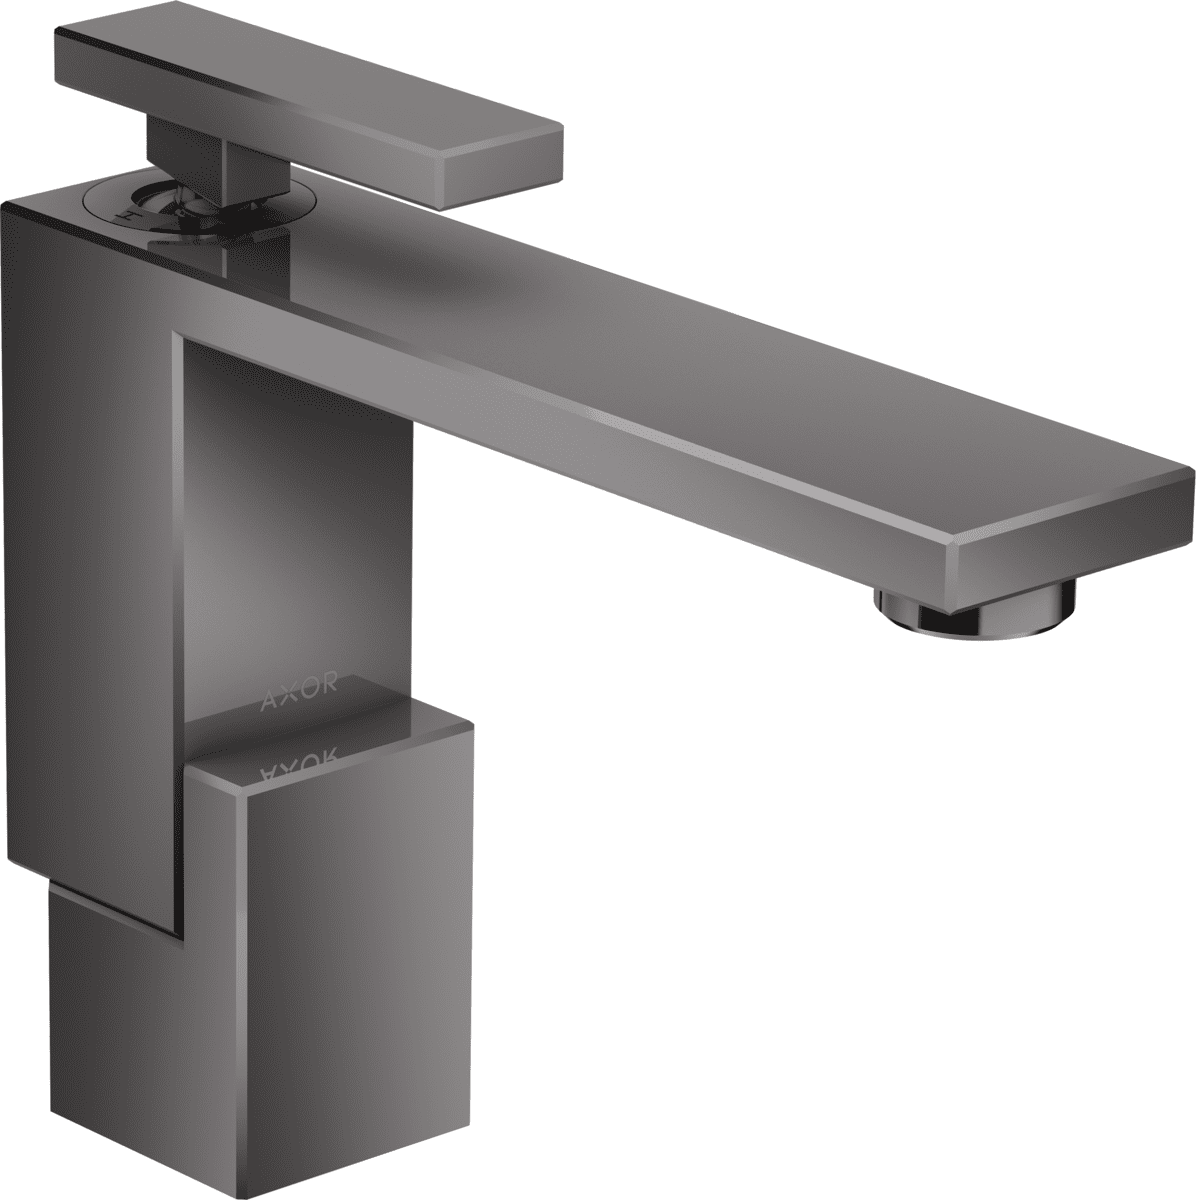 Picture of HANSGROHE AXOR Edge Single lever basin mixer 130 with push-open waste set #46010330 - Polished Black Chrome